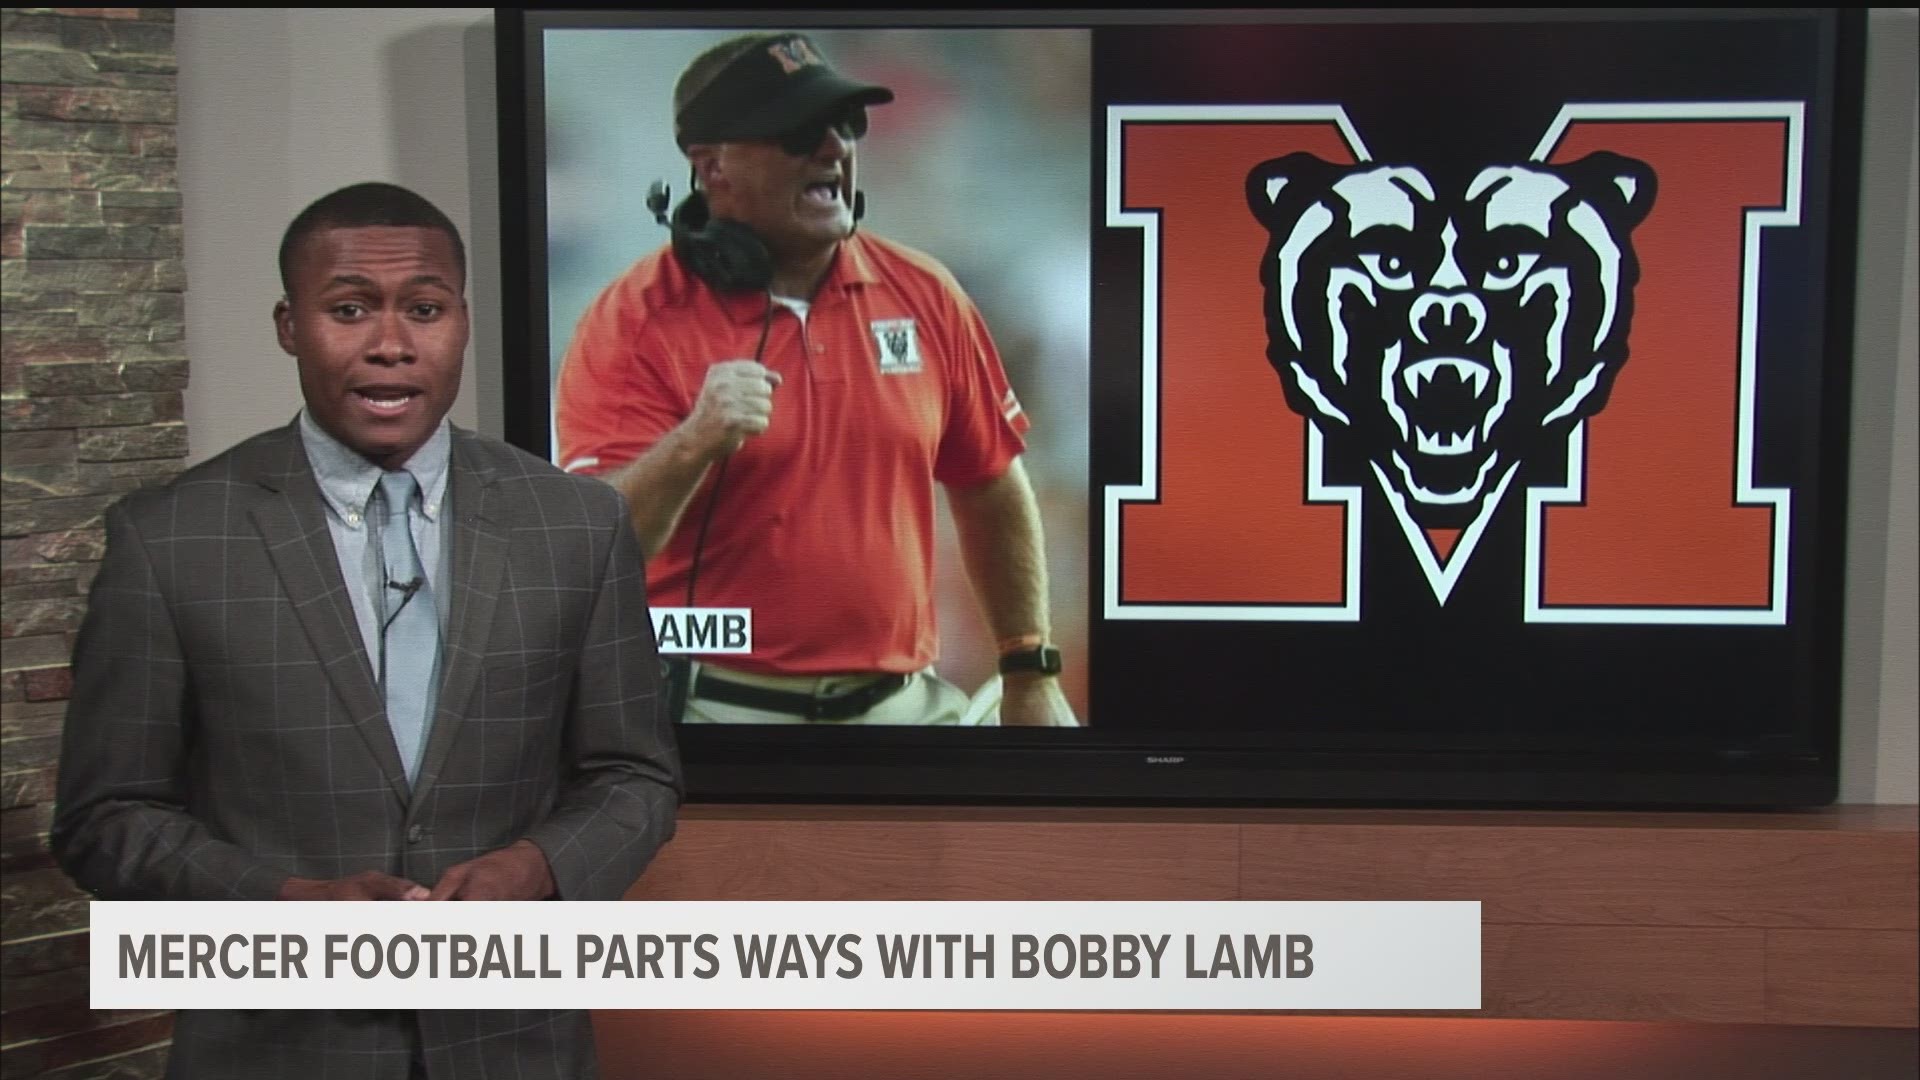 Bobby Lamb brought football back to Mercer's campus in 2013.